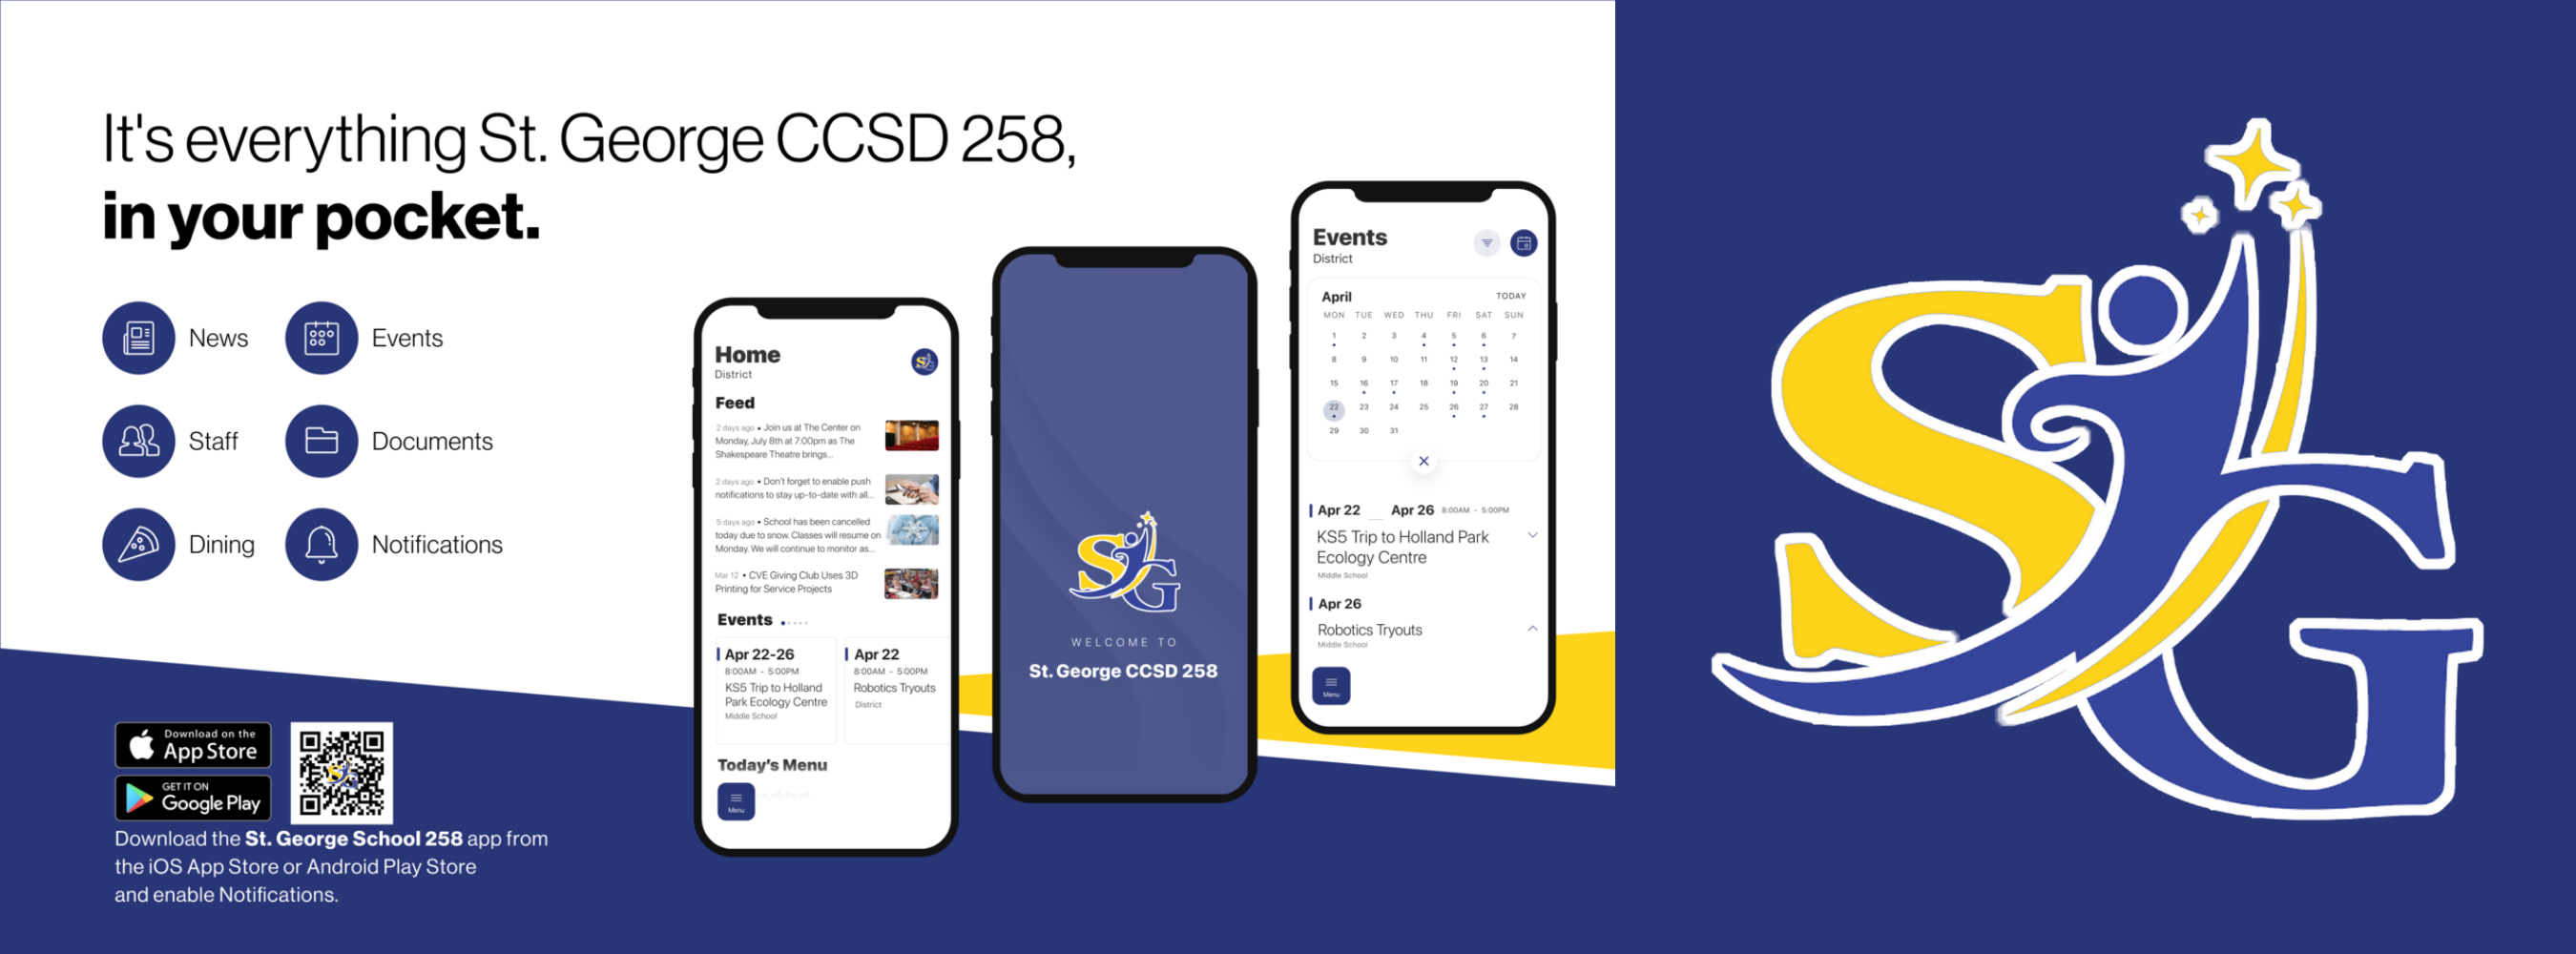 Marketing for St. George CCSD 259, in your pocket. News/ events/ staff/ documents/ dining/ notification. 